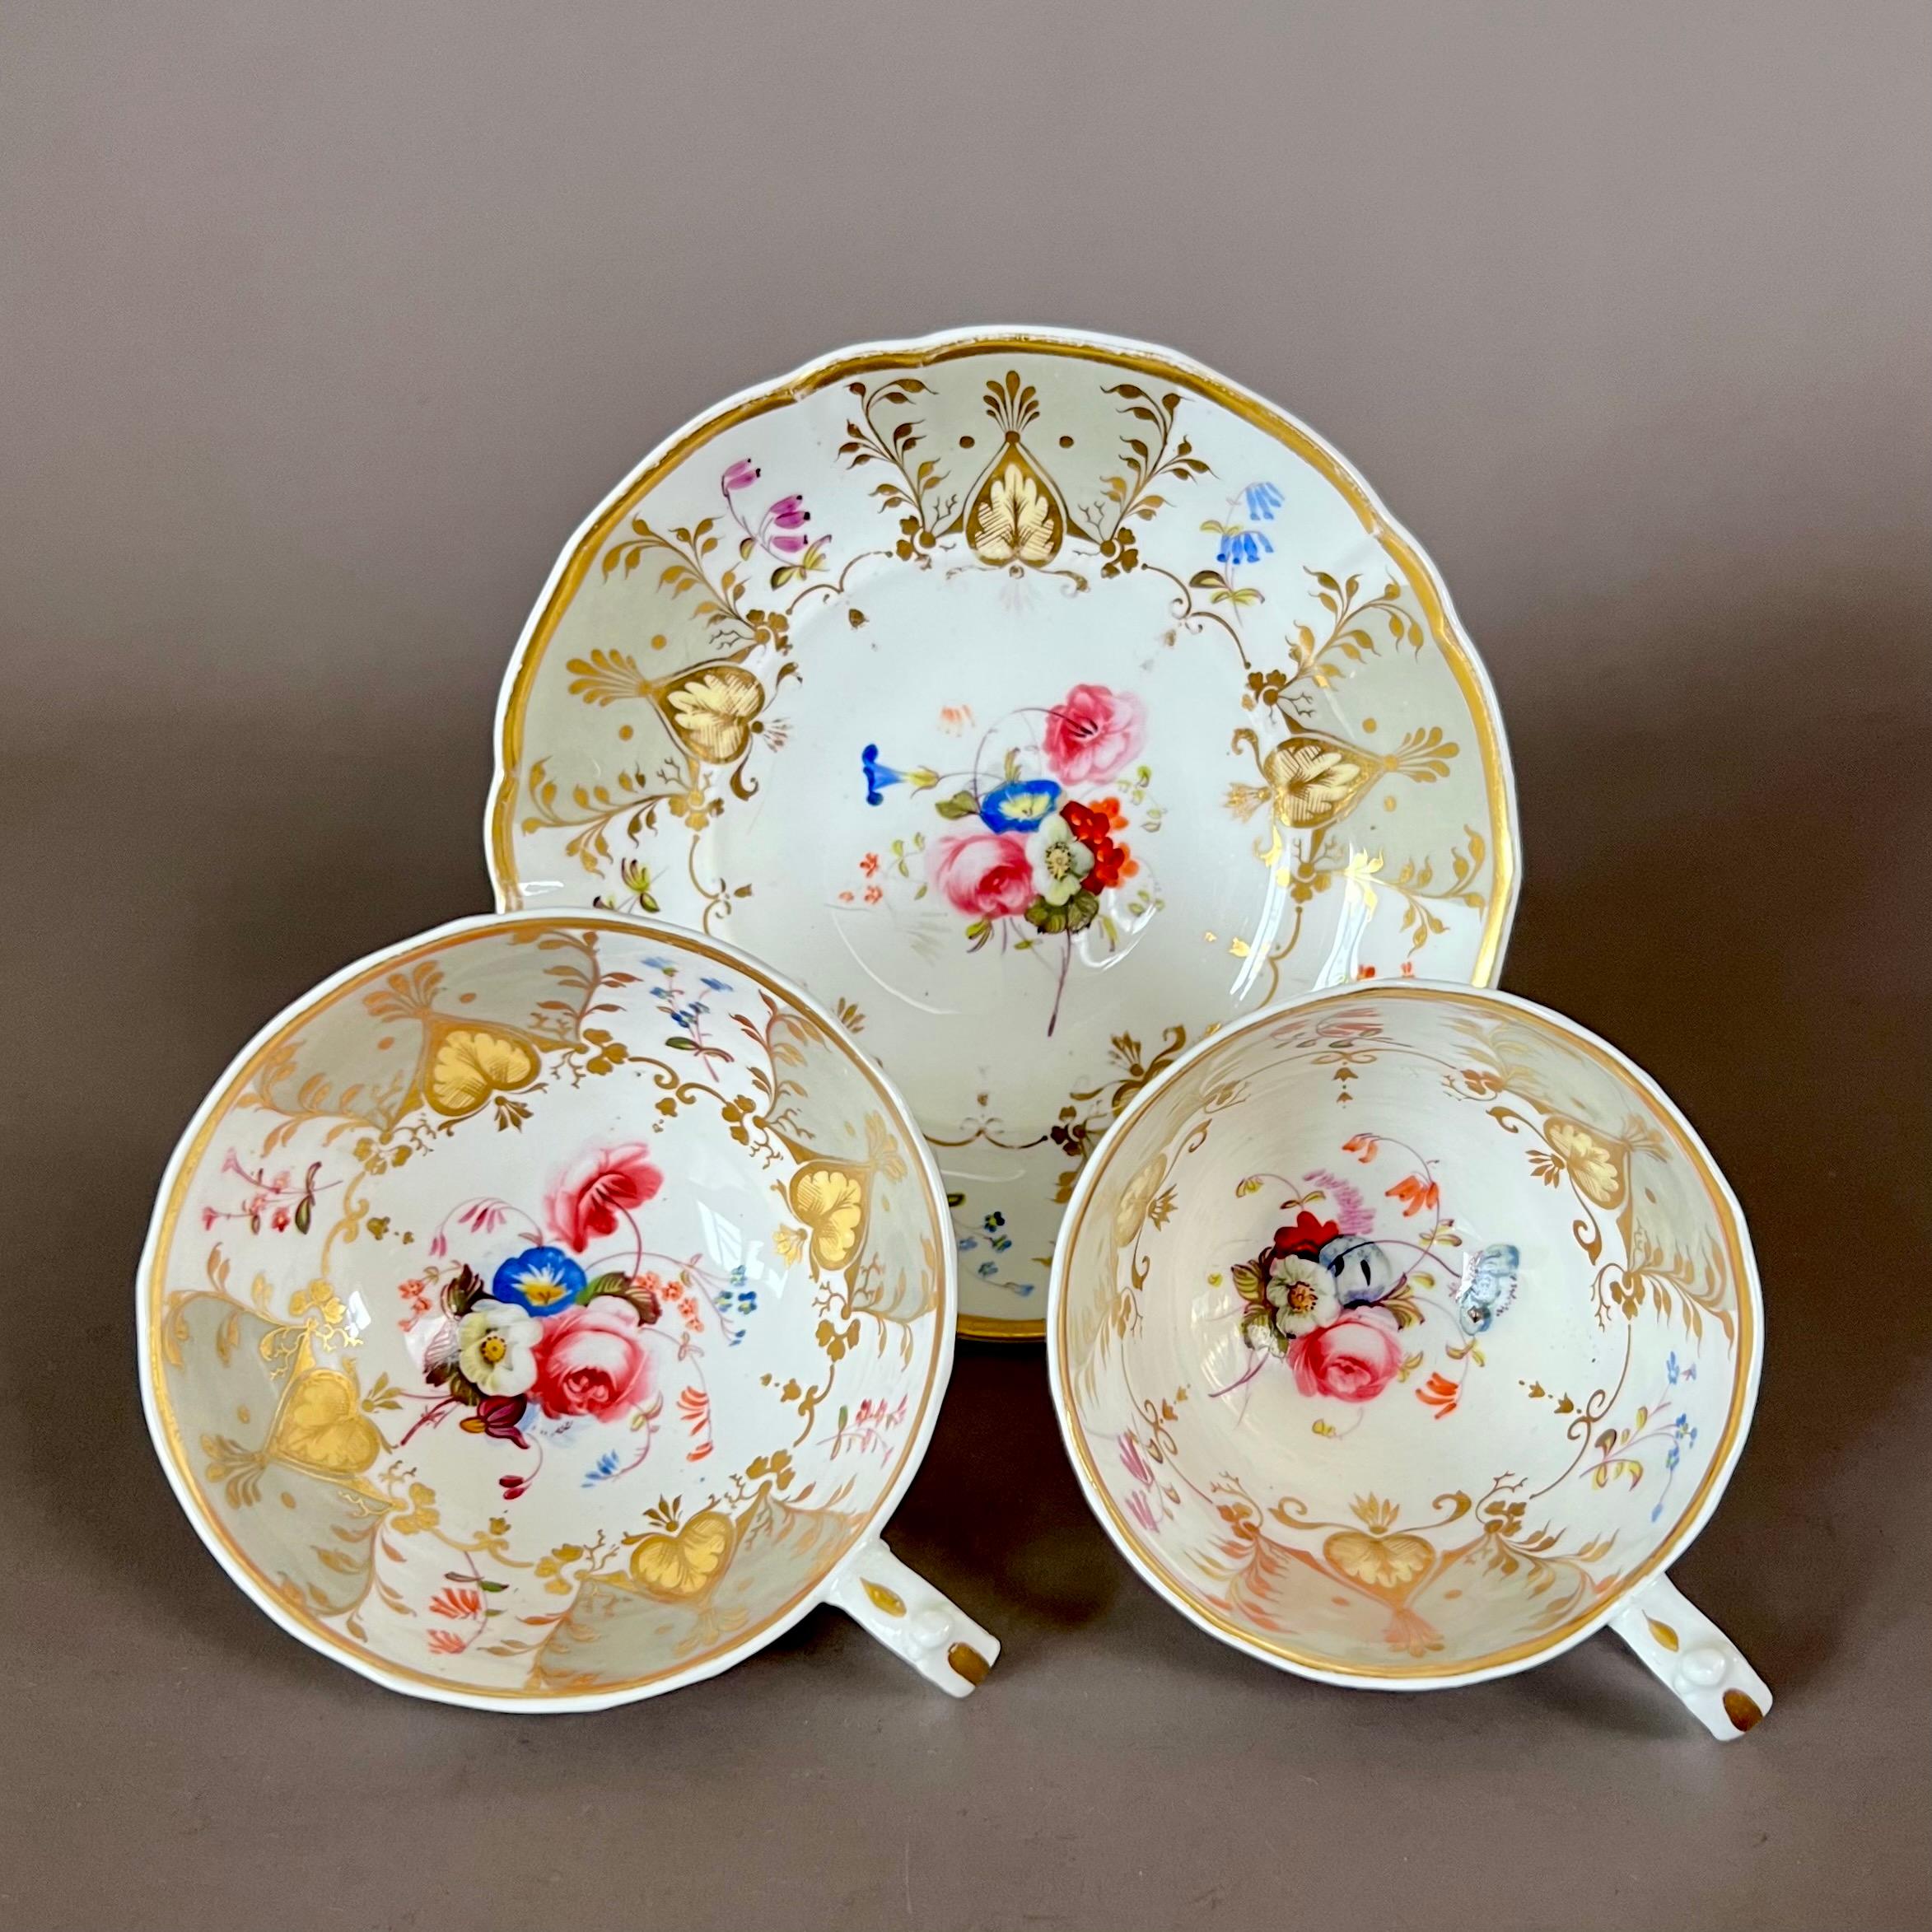 Rococo Revival Samuel Alcock Solitaire Tea Set, Beige, Pale Yellow and Flowers, ca 1833 For Sale